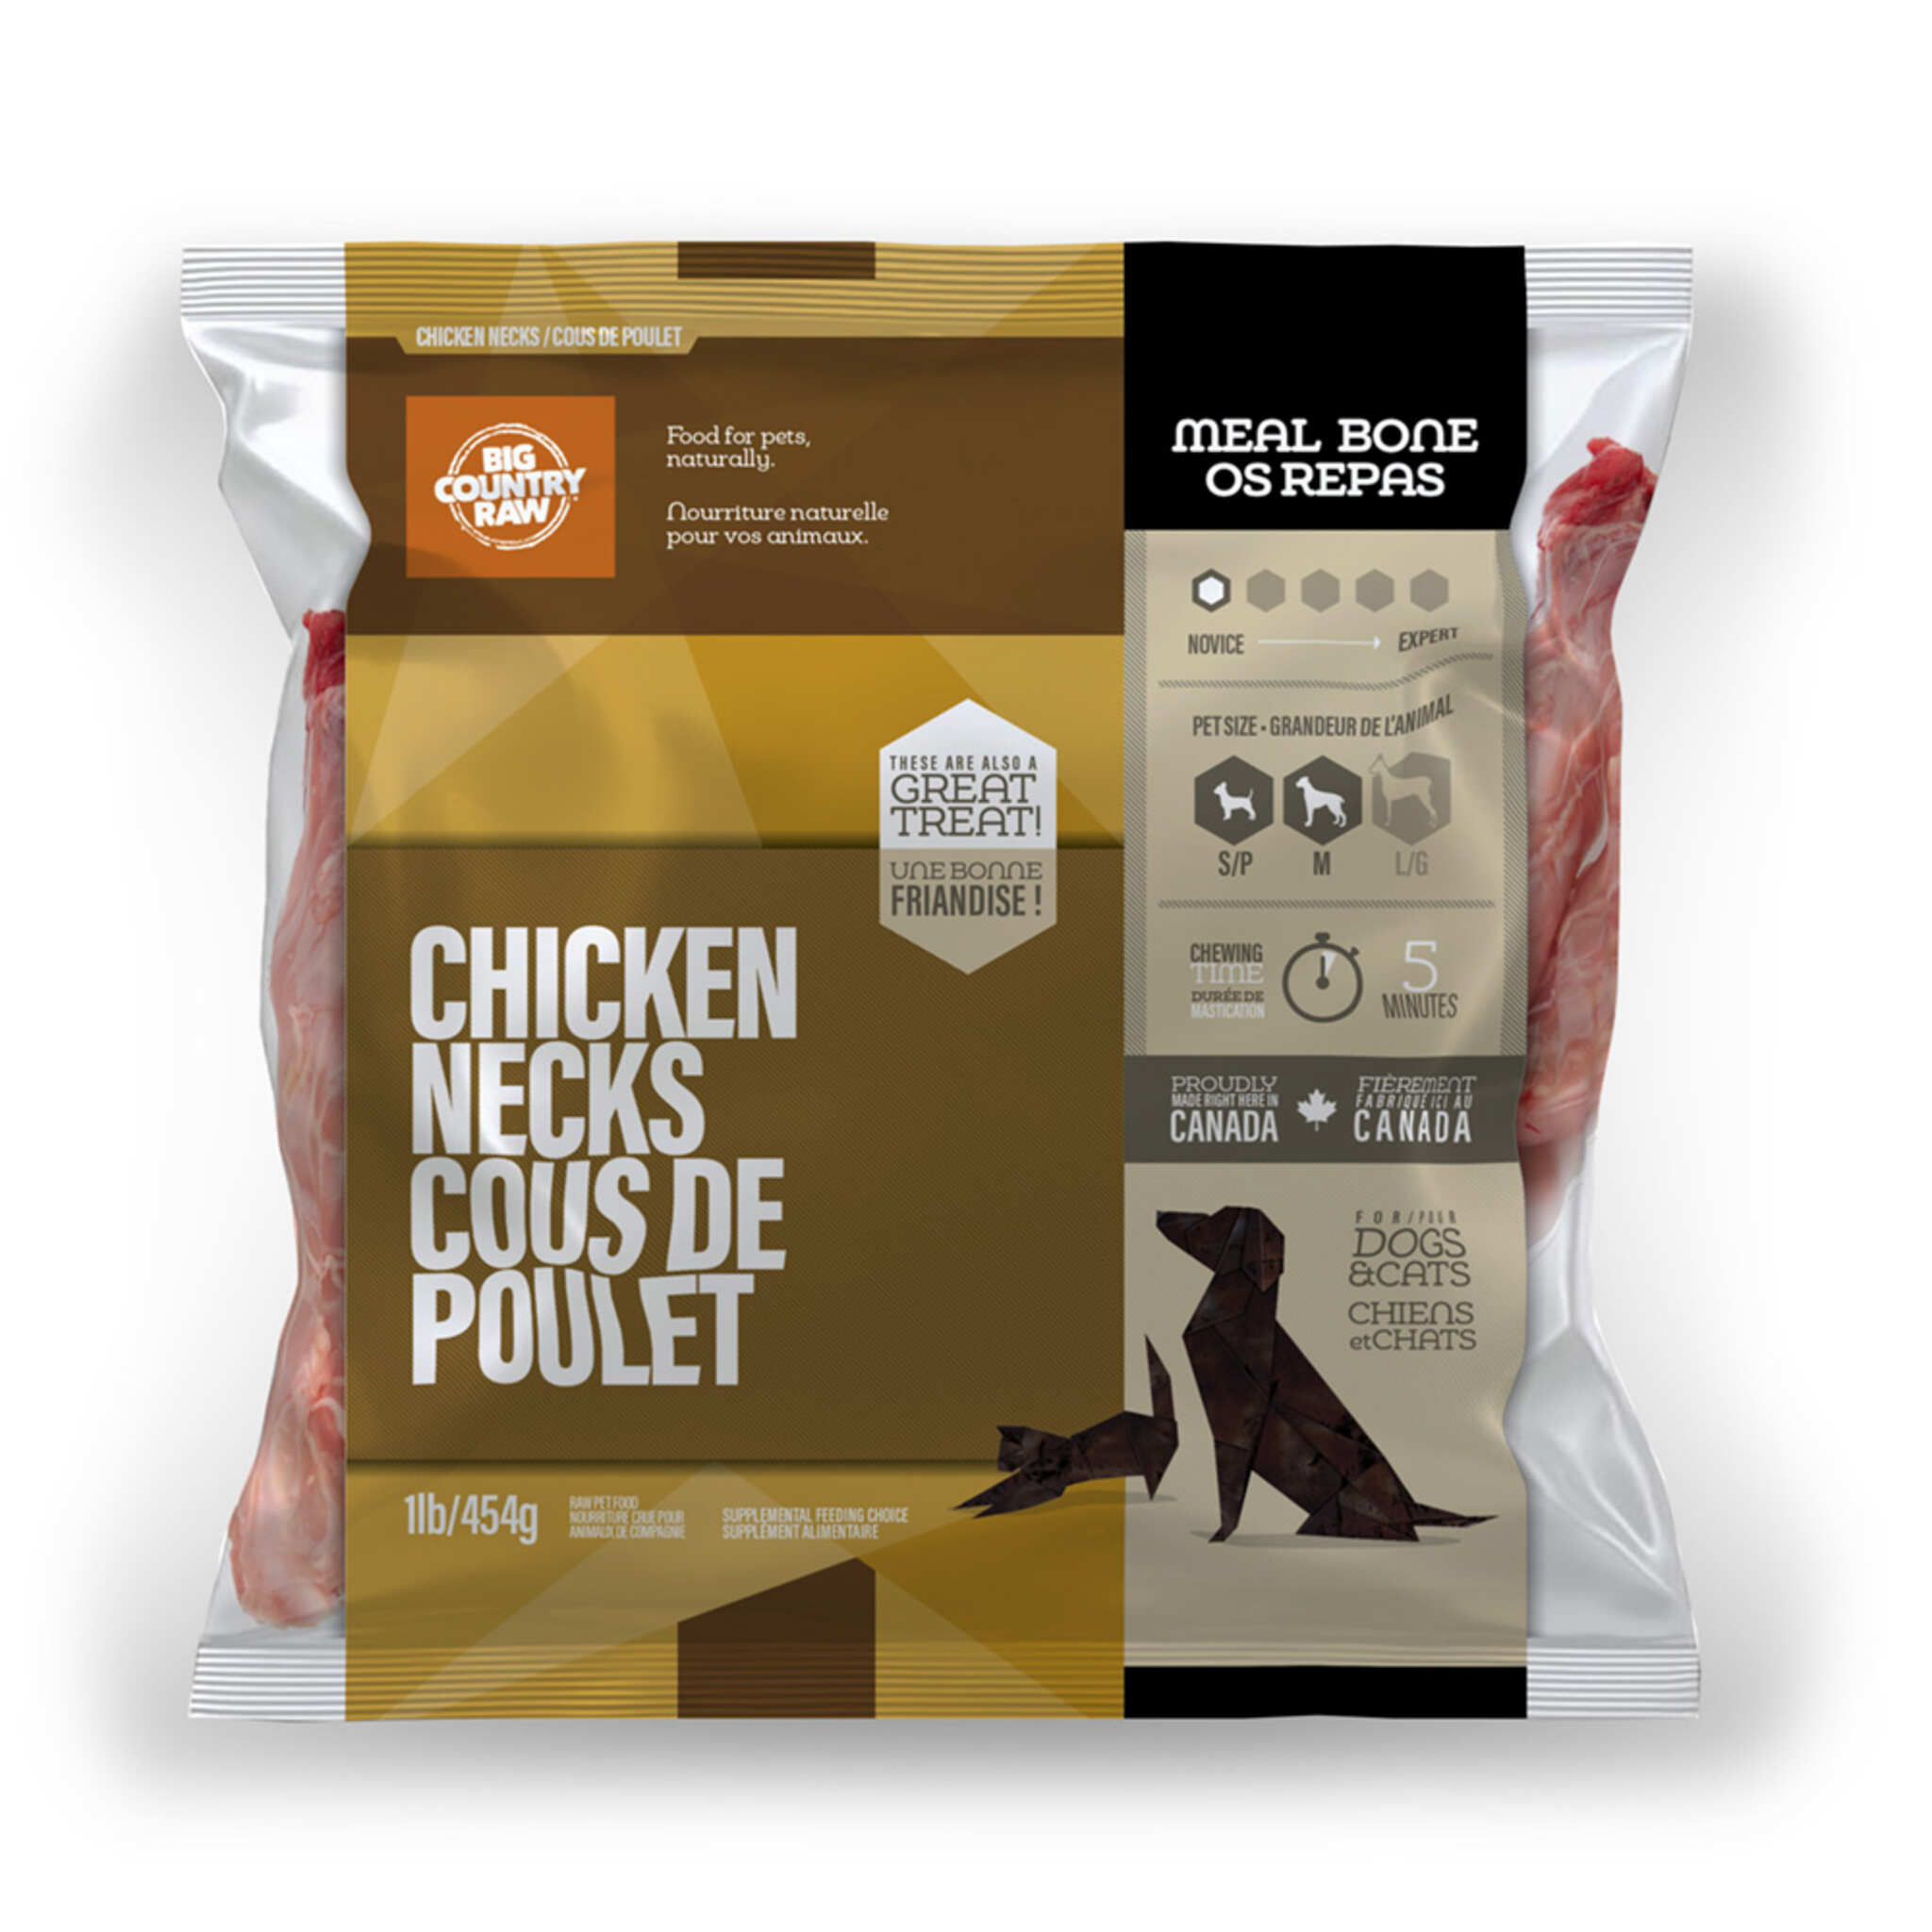 A bag of Big Country Raw Chicken necks, Cat or Dog treat, 1 lb, roughly 5 minutes chewing time per treat, requires freezing.